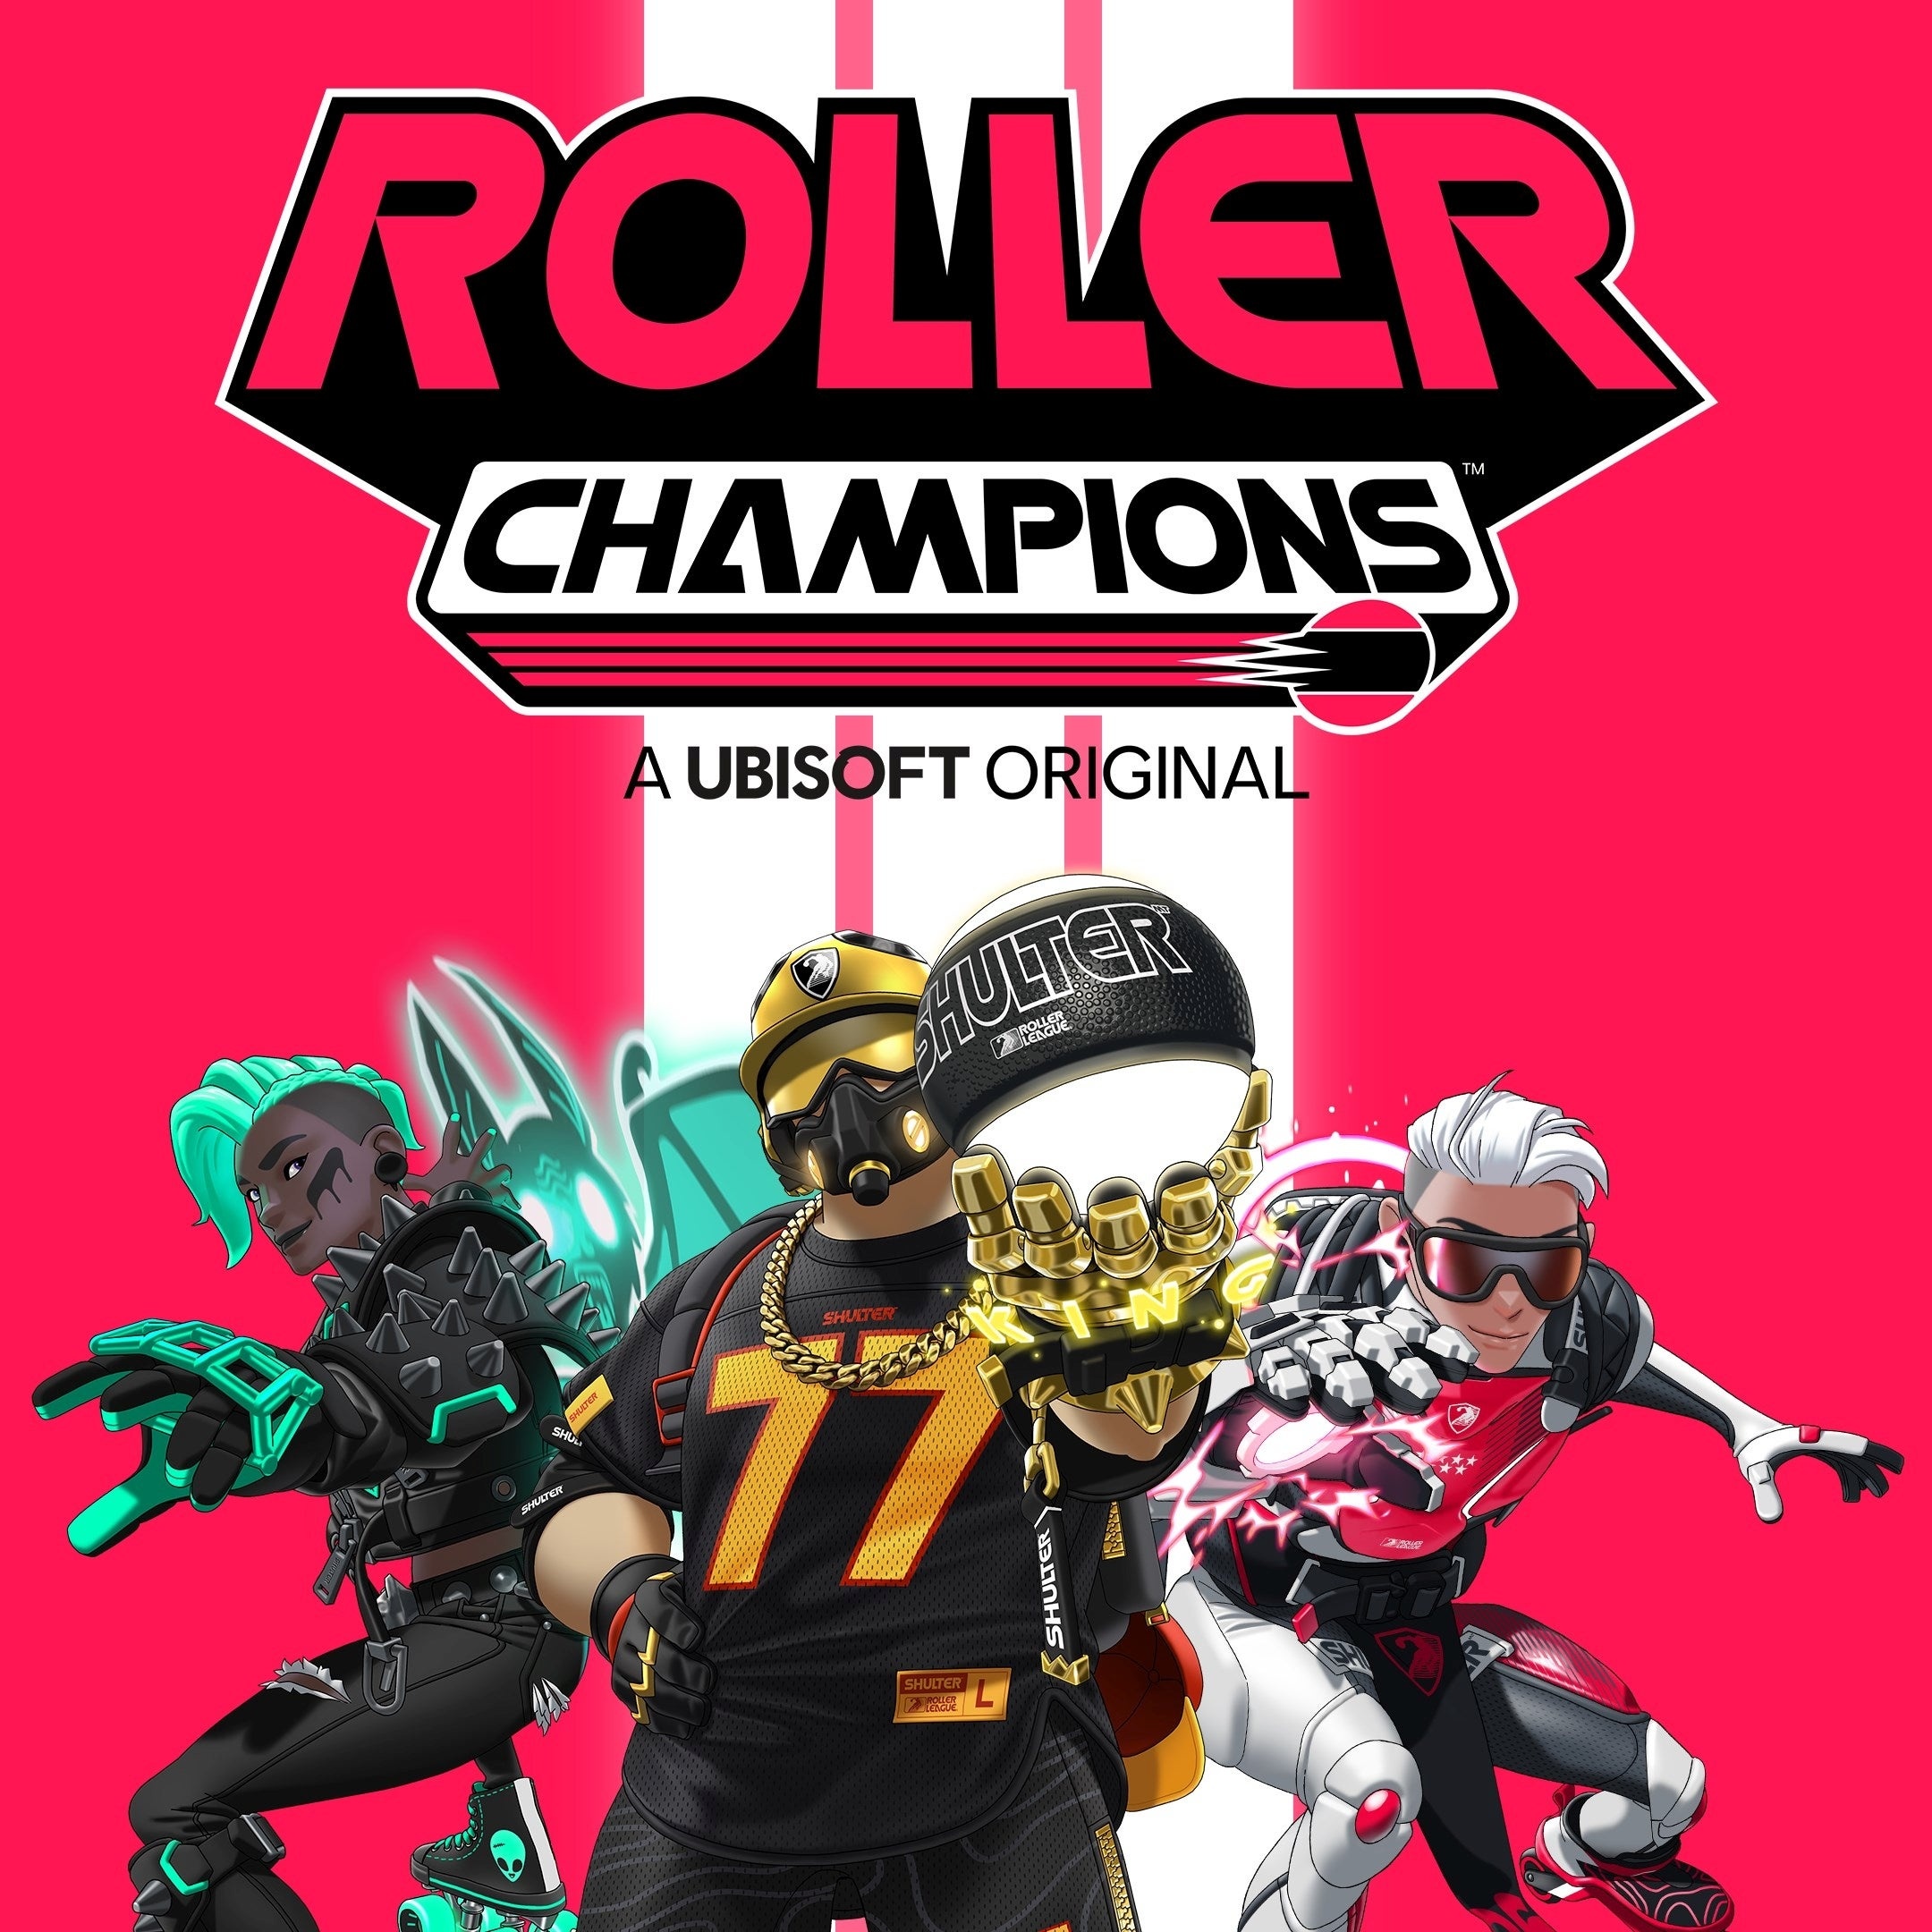 Roller Champions (Game): Ubisoft, Officially announced during their press conference at E3 2019. 2160x2160 HD Background.